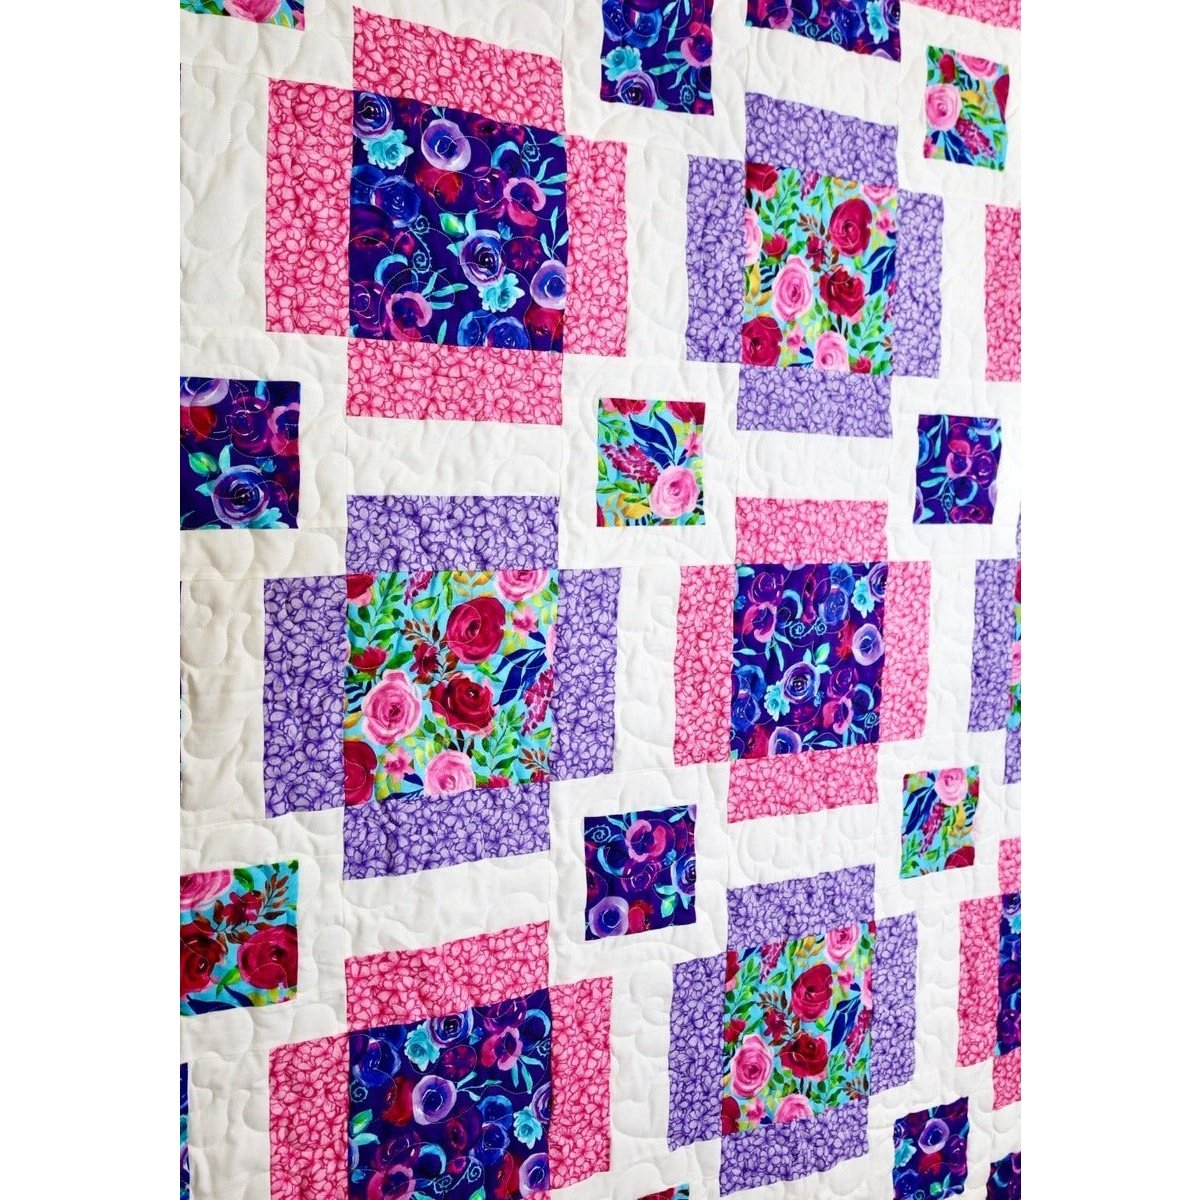 Floral Fantasy Pre-Cut Quilt Kit - Includes Pattern, Binding, Backing & Easy Instructions for Beginners